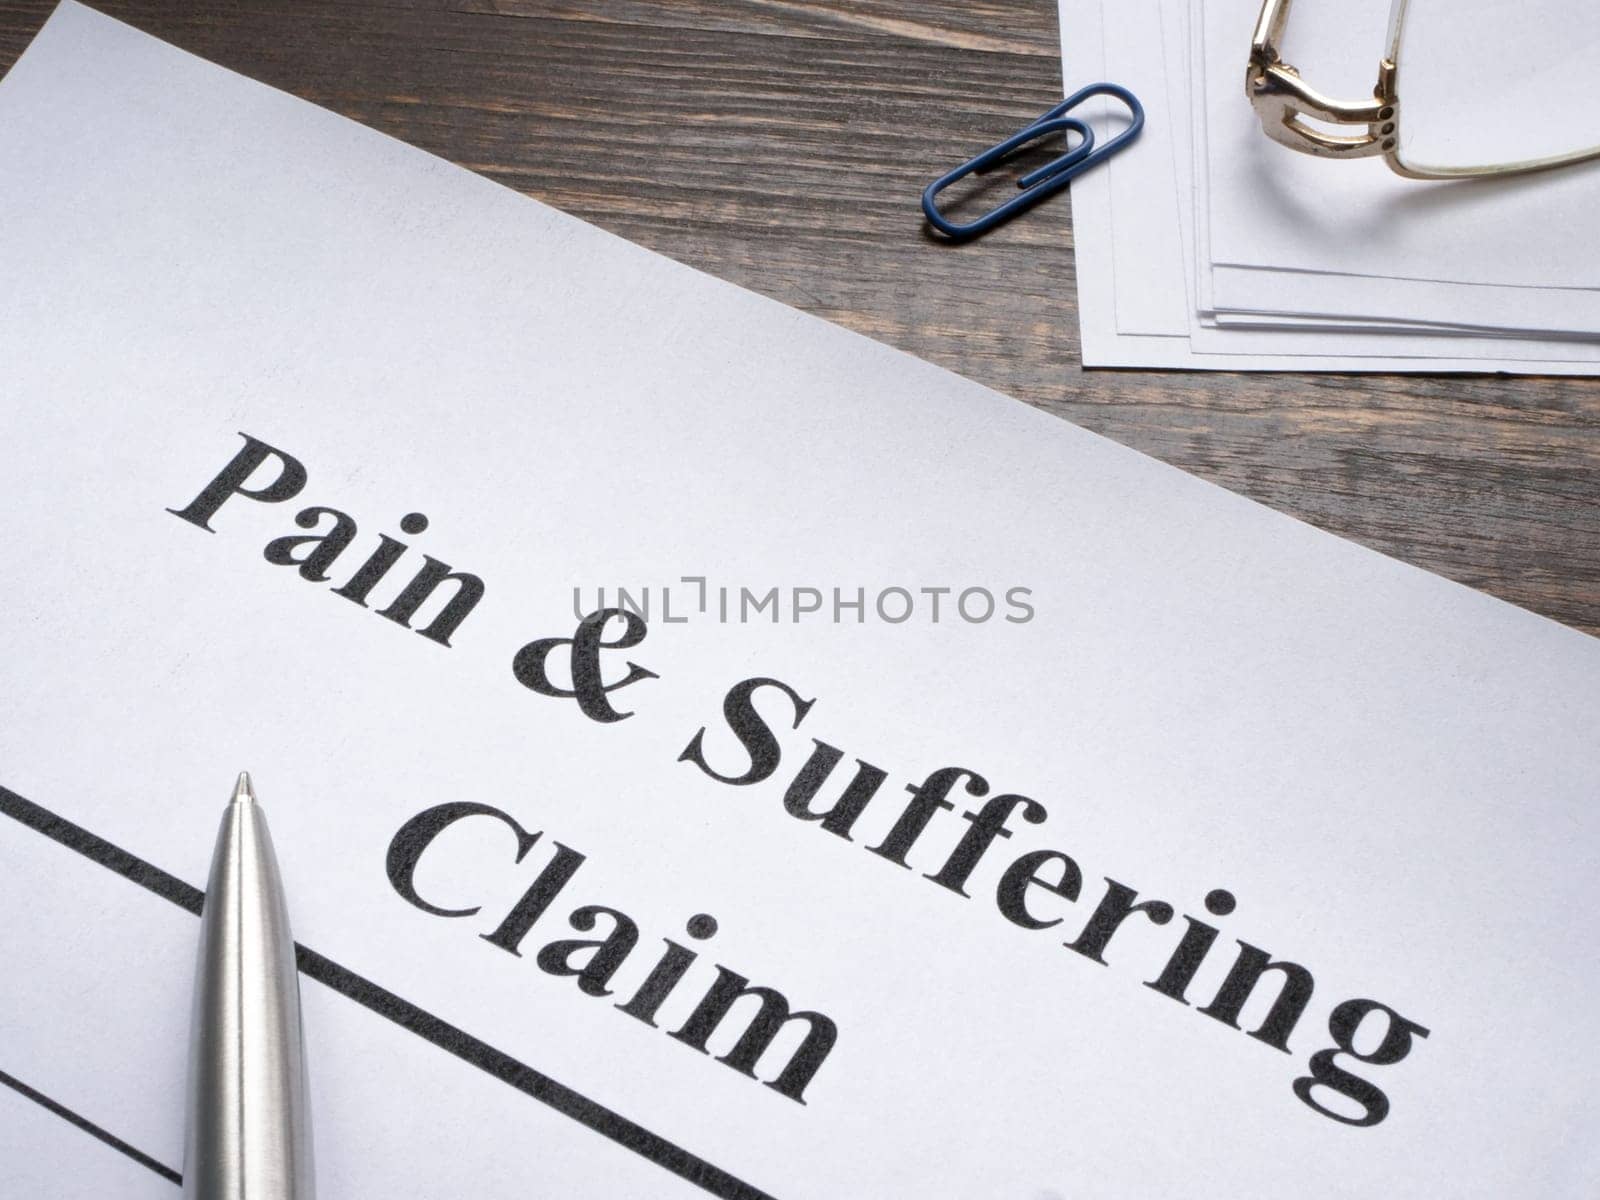 Pain and suffering claim with a pen for signing. by designer491